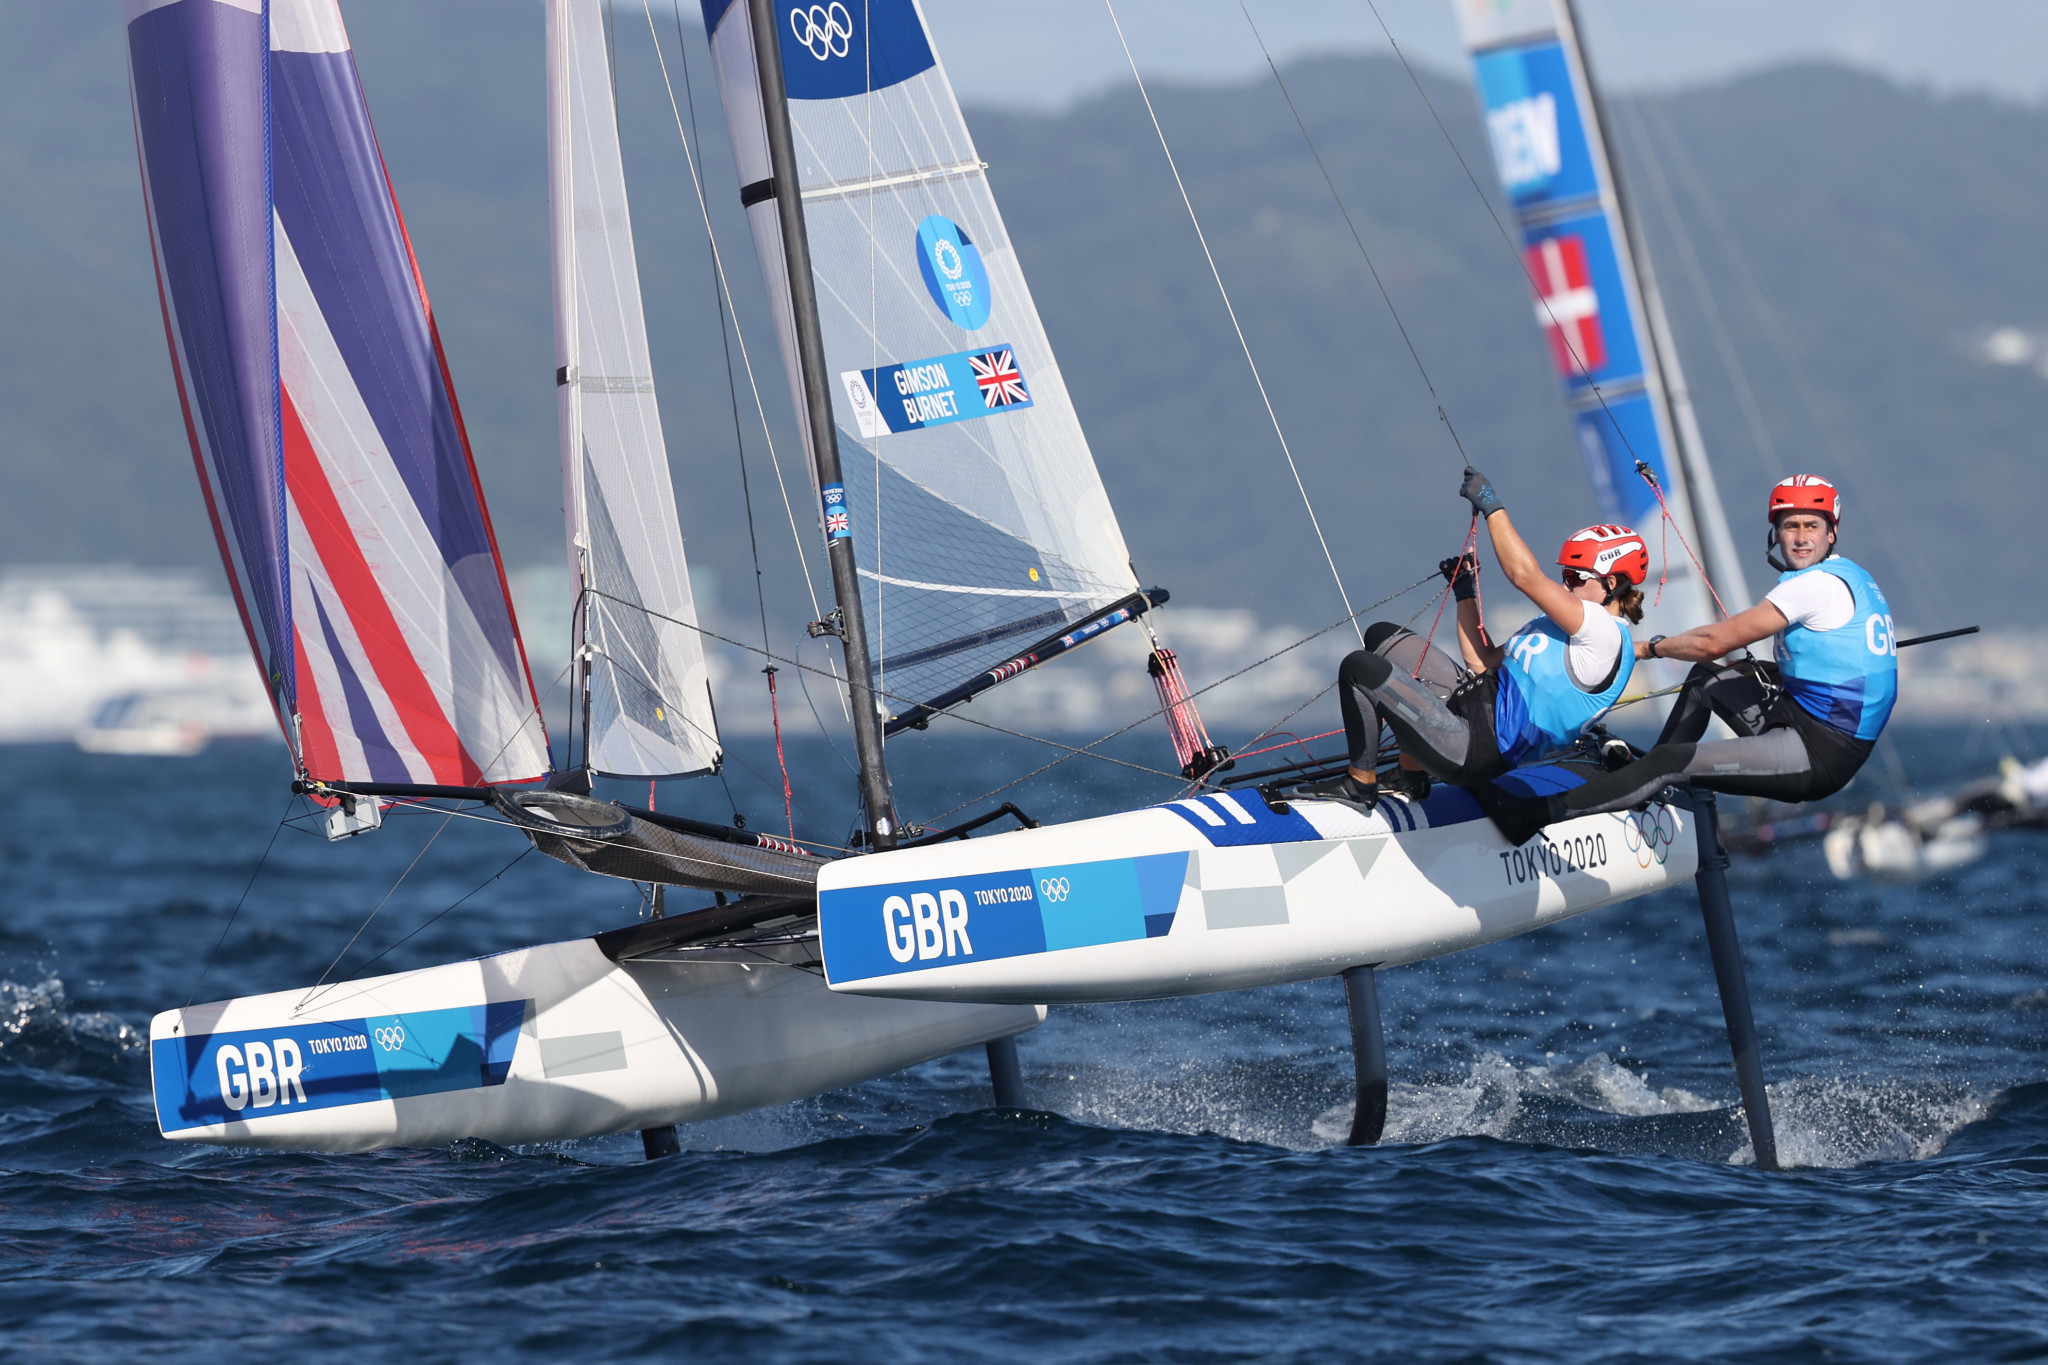 Britain's Olympic silver medallists John Gimson and Anna Burnet moved top of the Nacra 17 standings with one day remaining at the World Championships ©Getty Images